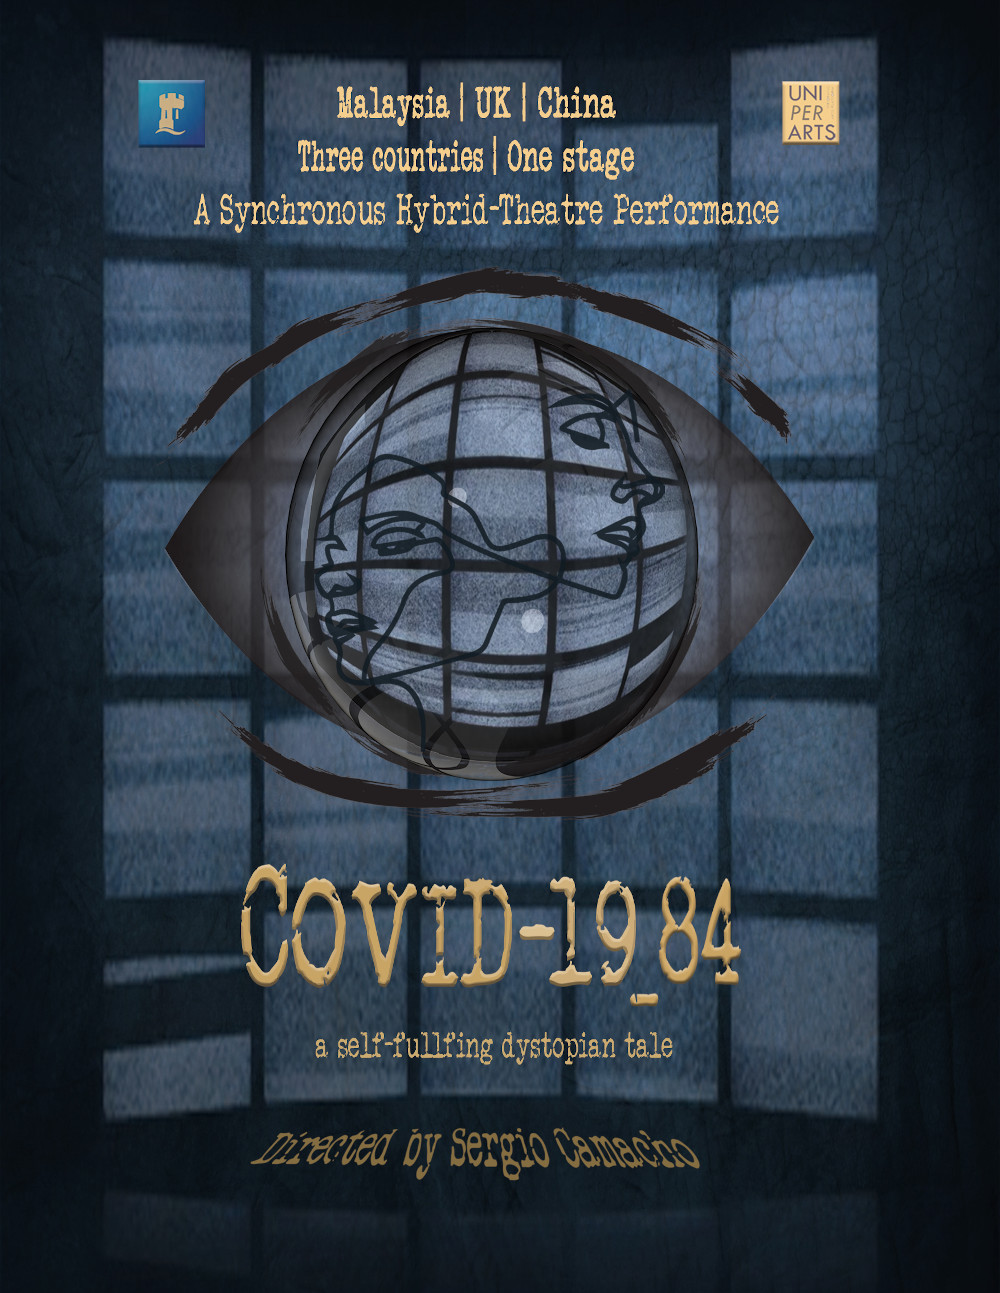 Poster promoting the play "Covid 19_84"